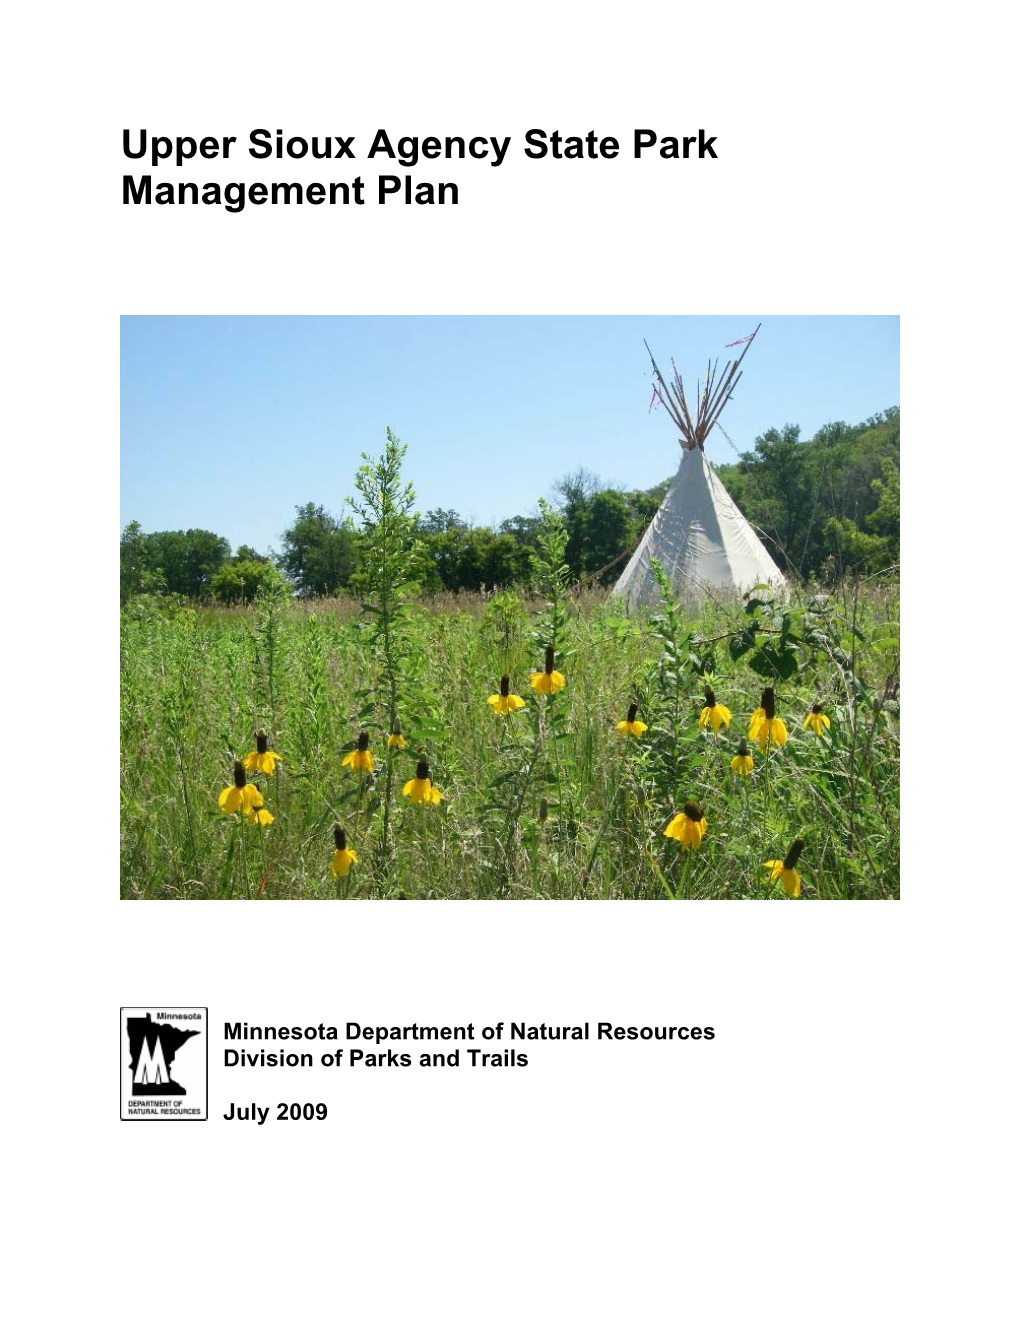 Upper Sioux Agency State Park Management Plan